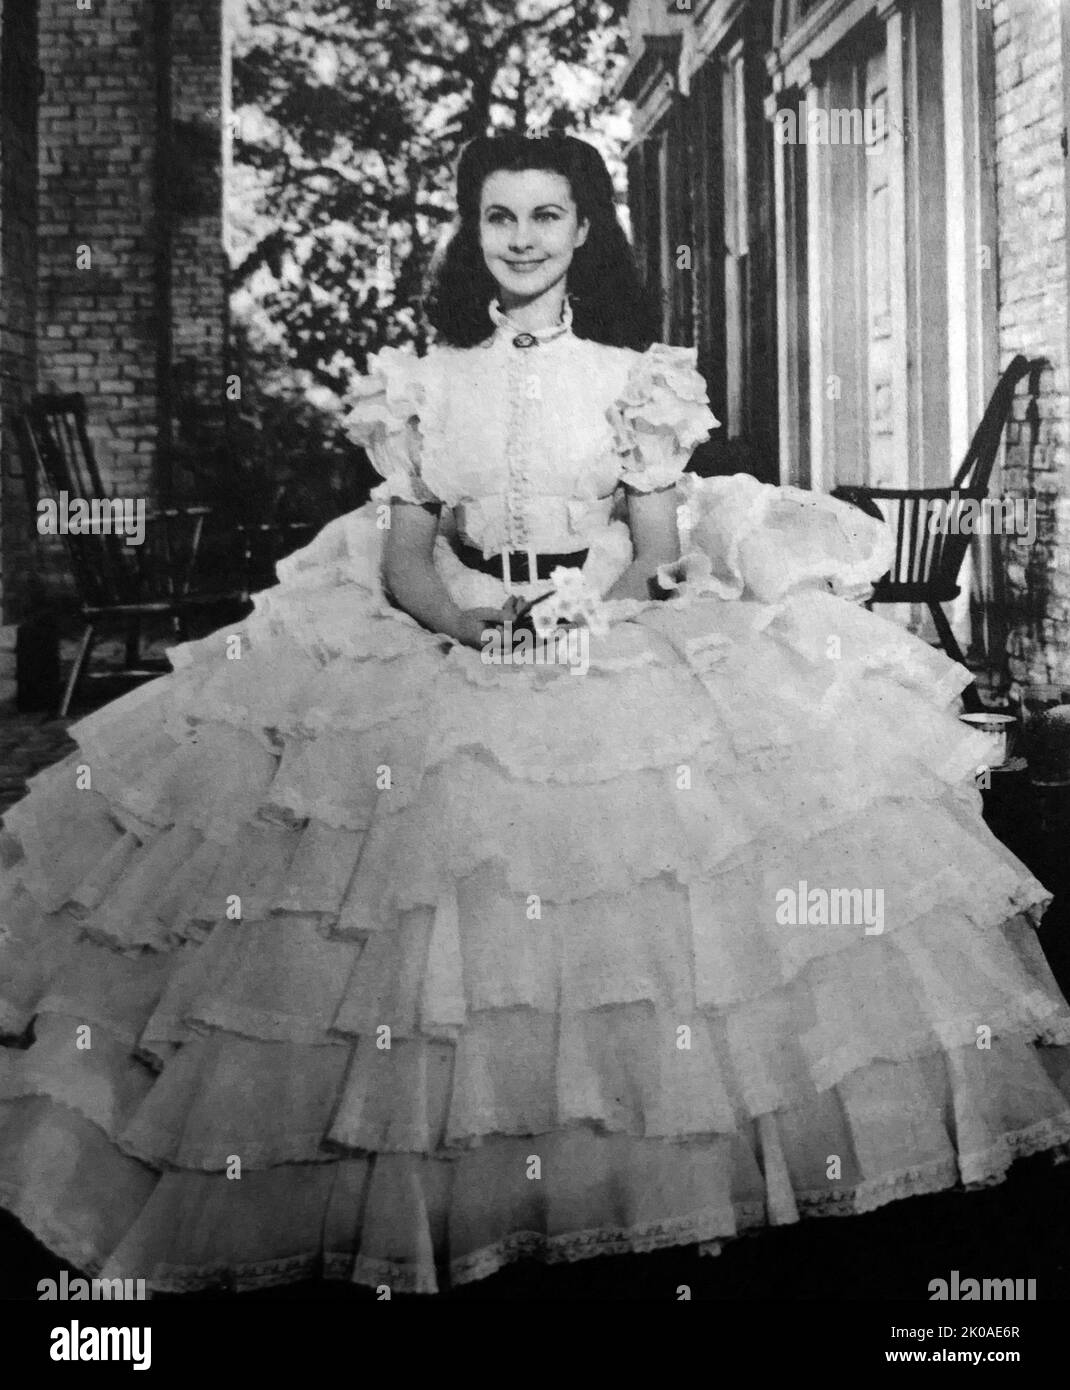 The choice for the part of Scarlett O'Hara in 'Gone With the Wind' was the English actress Vivien Leigh, pictured in her delightful crinoline. Clark Gable took the part of Rhett Butler. The film, which was majestically long, rich in color, and the whopping success of the year in 1939 Stock Photo